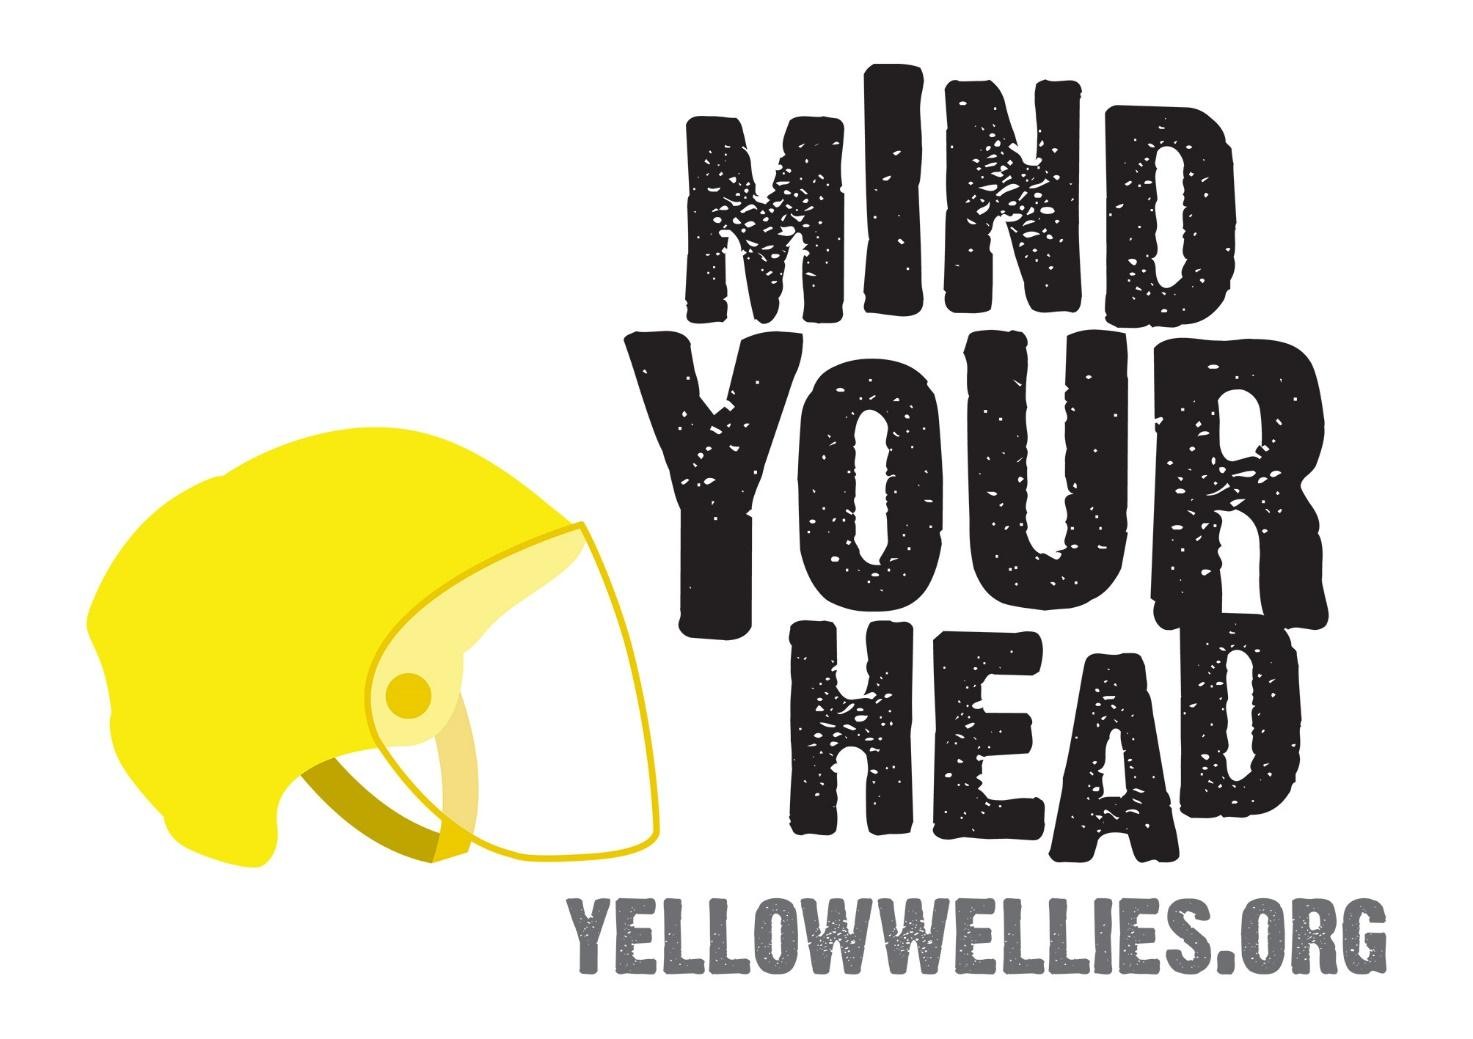 The Farm Safety Partnership Mind Your Head Campaign takes place from 13 to 17 February 2023